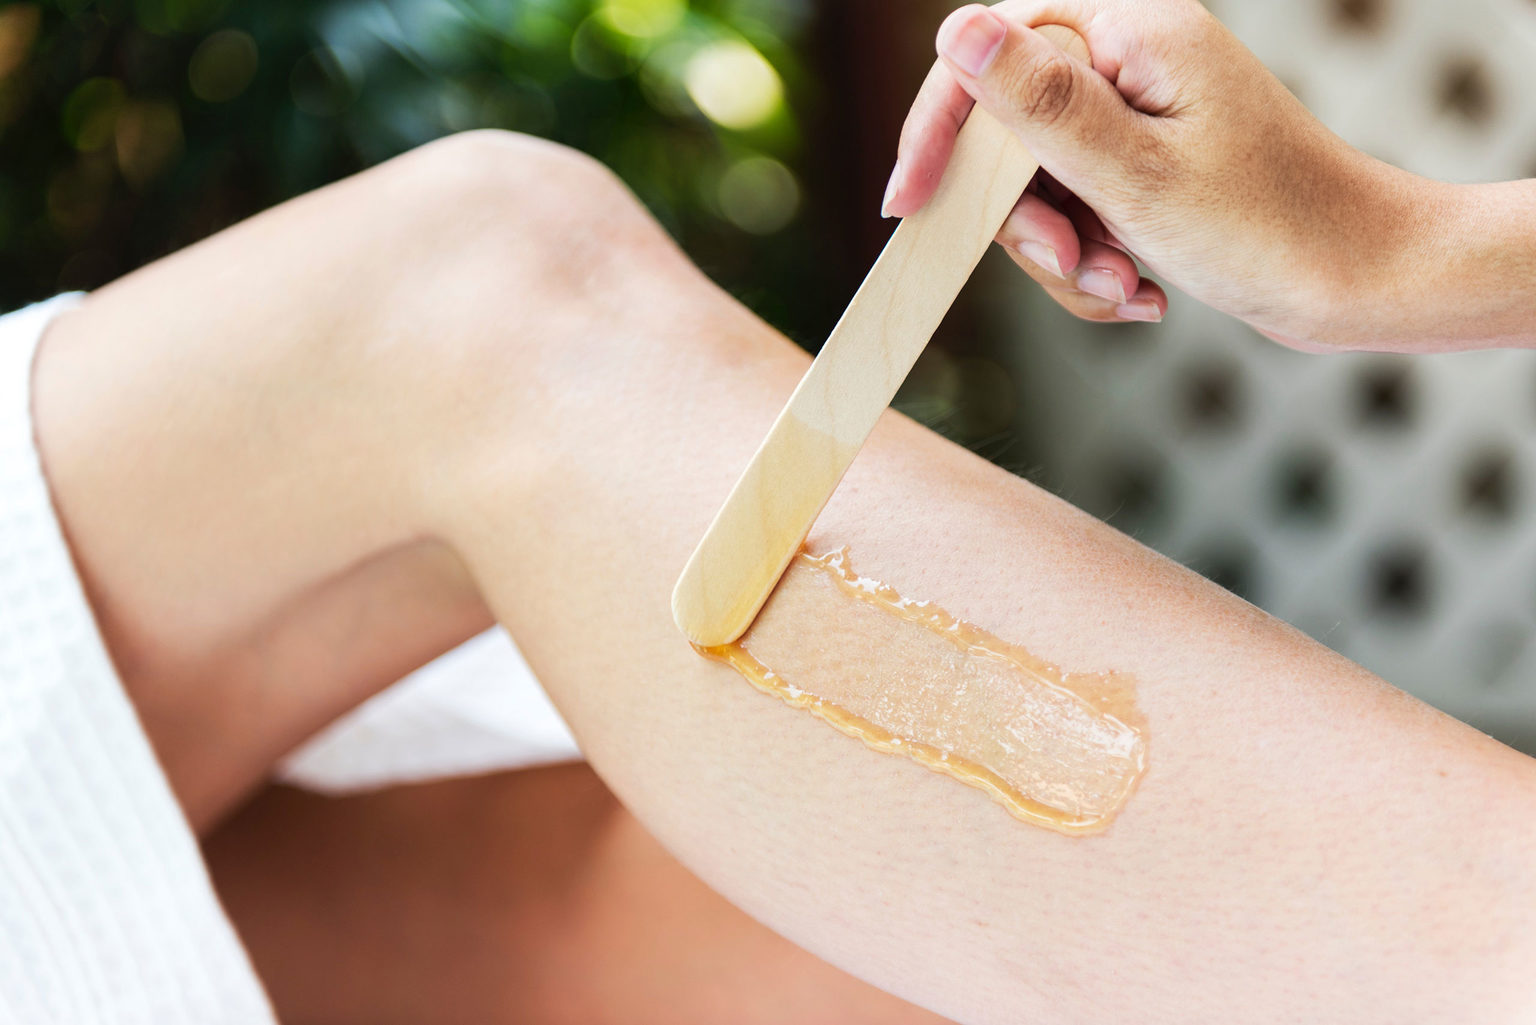 Applying wax to a leg during a spa beauty treatment